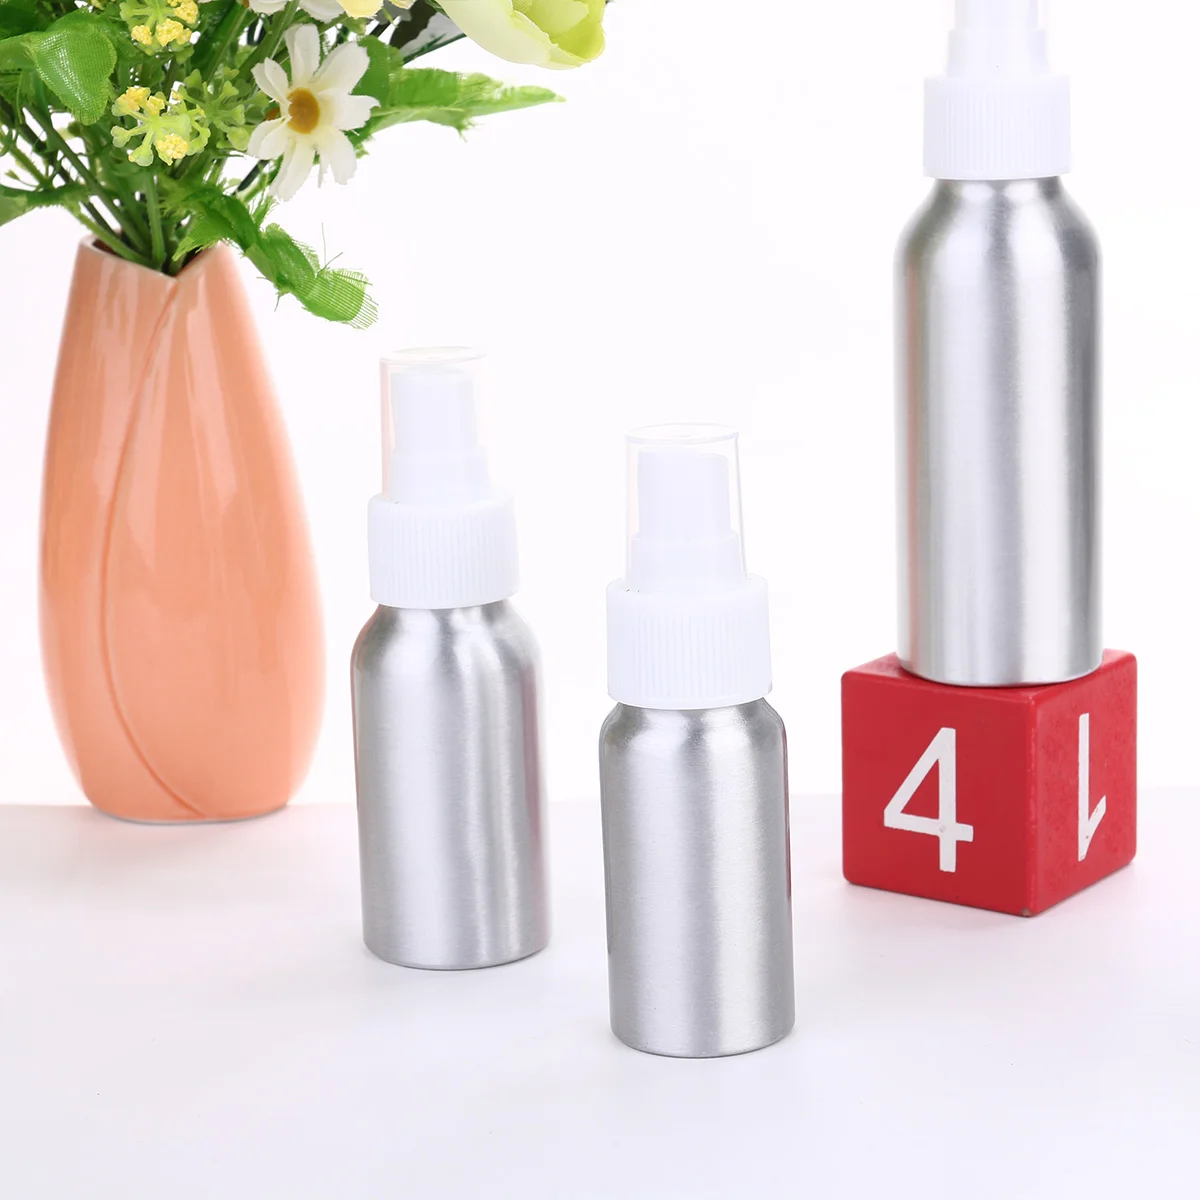 

3Pc Spray Bottles Empty Aluminum Spray Bottles Refillable Atomizers Spray Bottles for Travel Essential Oil Cleaning Products